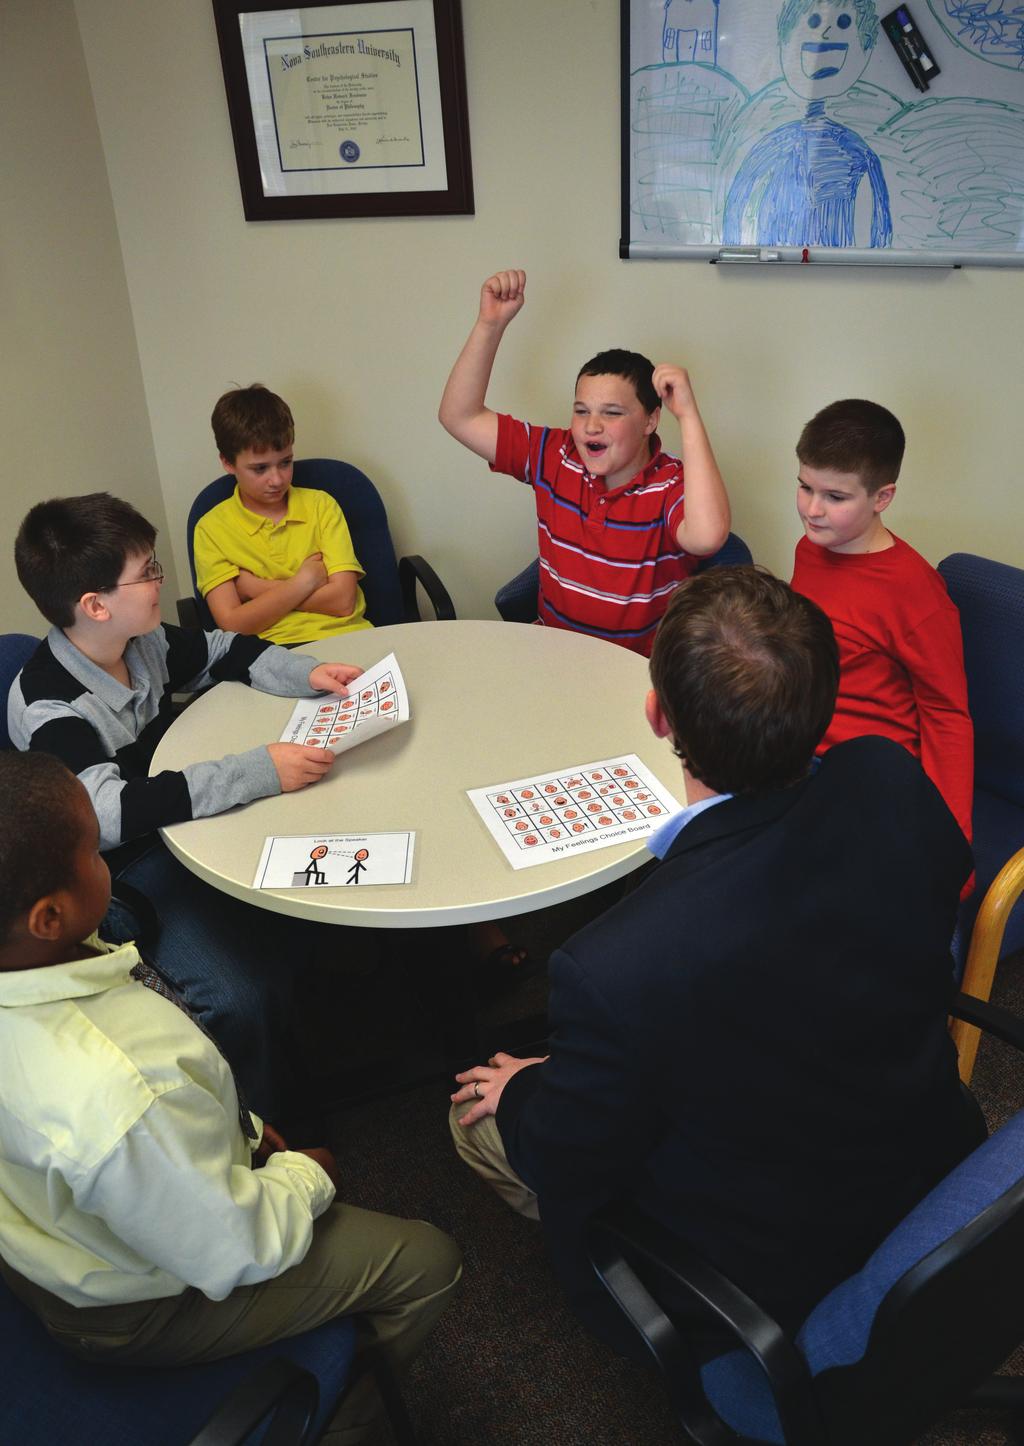 Who We Are The Center for Autism and Related Disorders (CARD) at Kennedy Krieger Institute is a multifaceted, interdisciplinary program serving children, families, and professionals in the autism